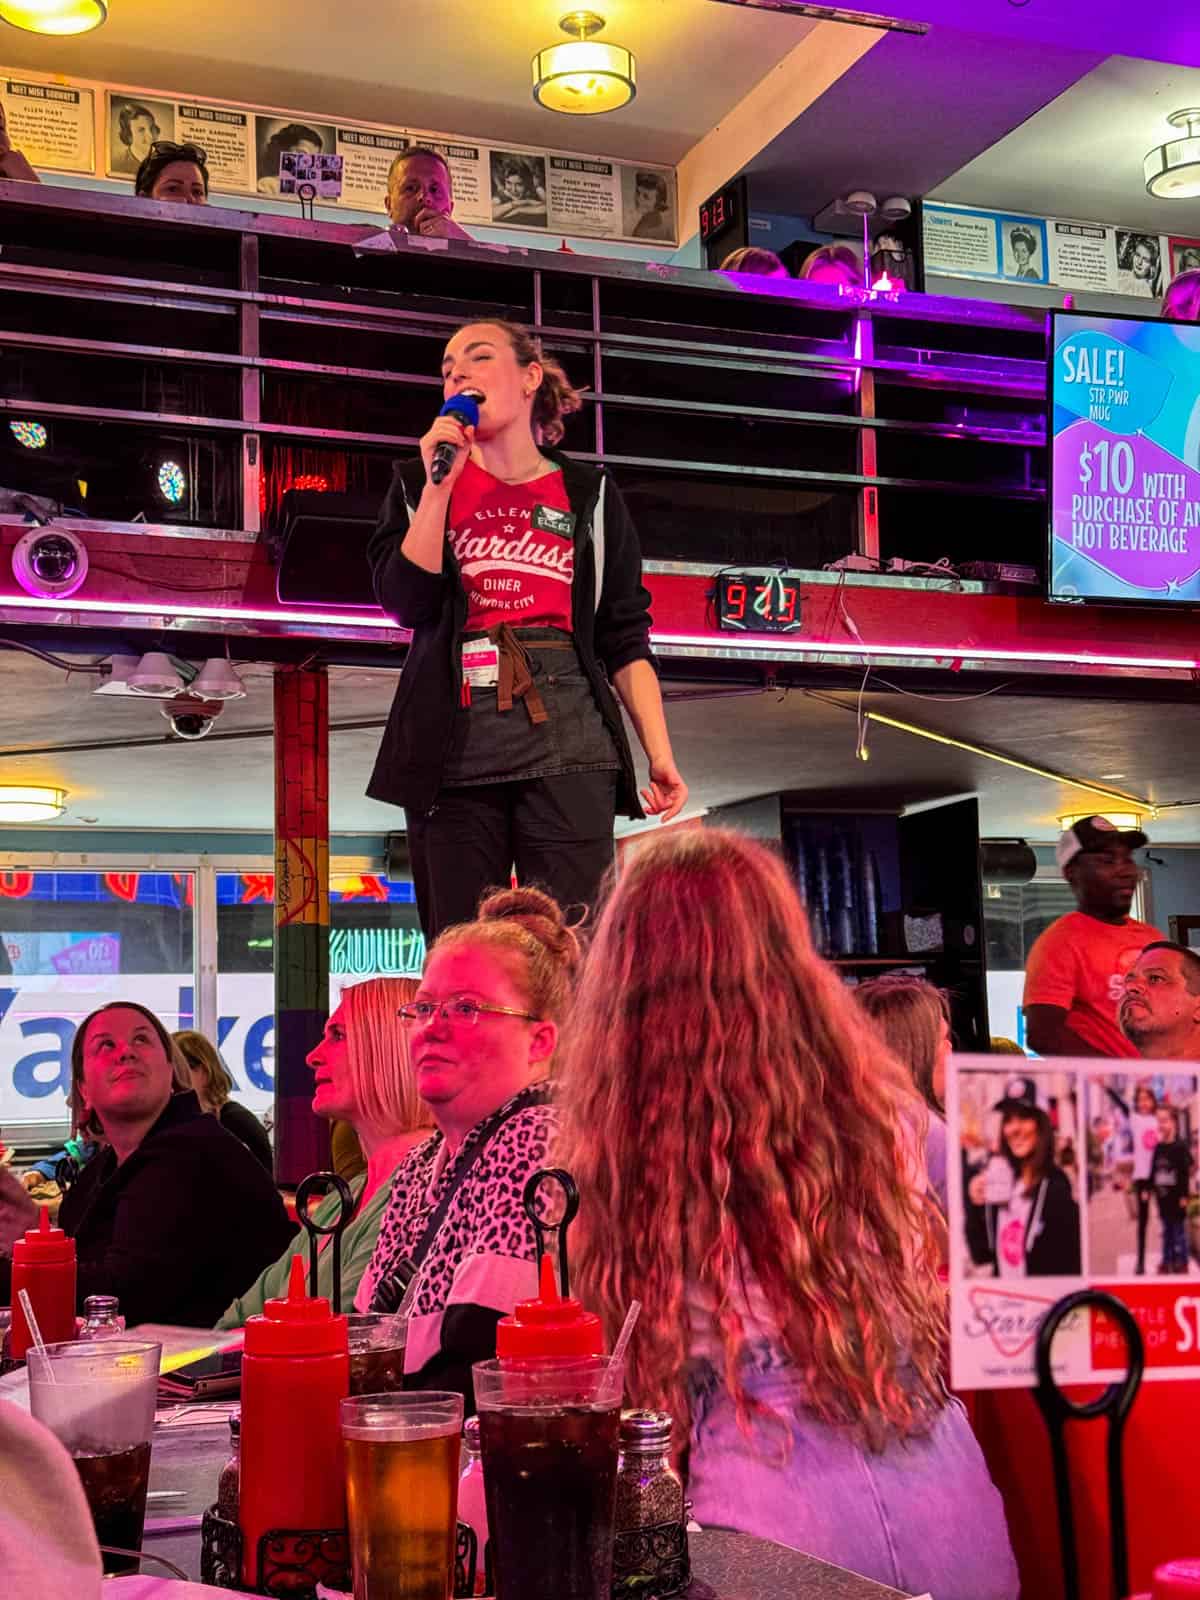 A performing server at the Stardust Diner.